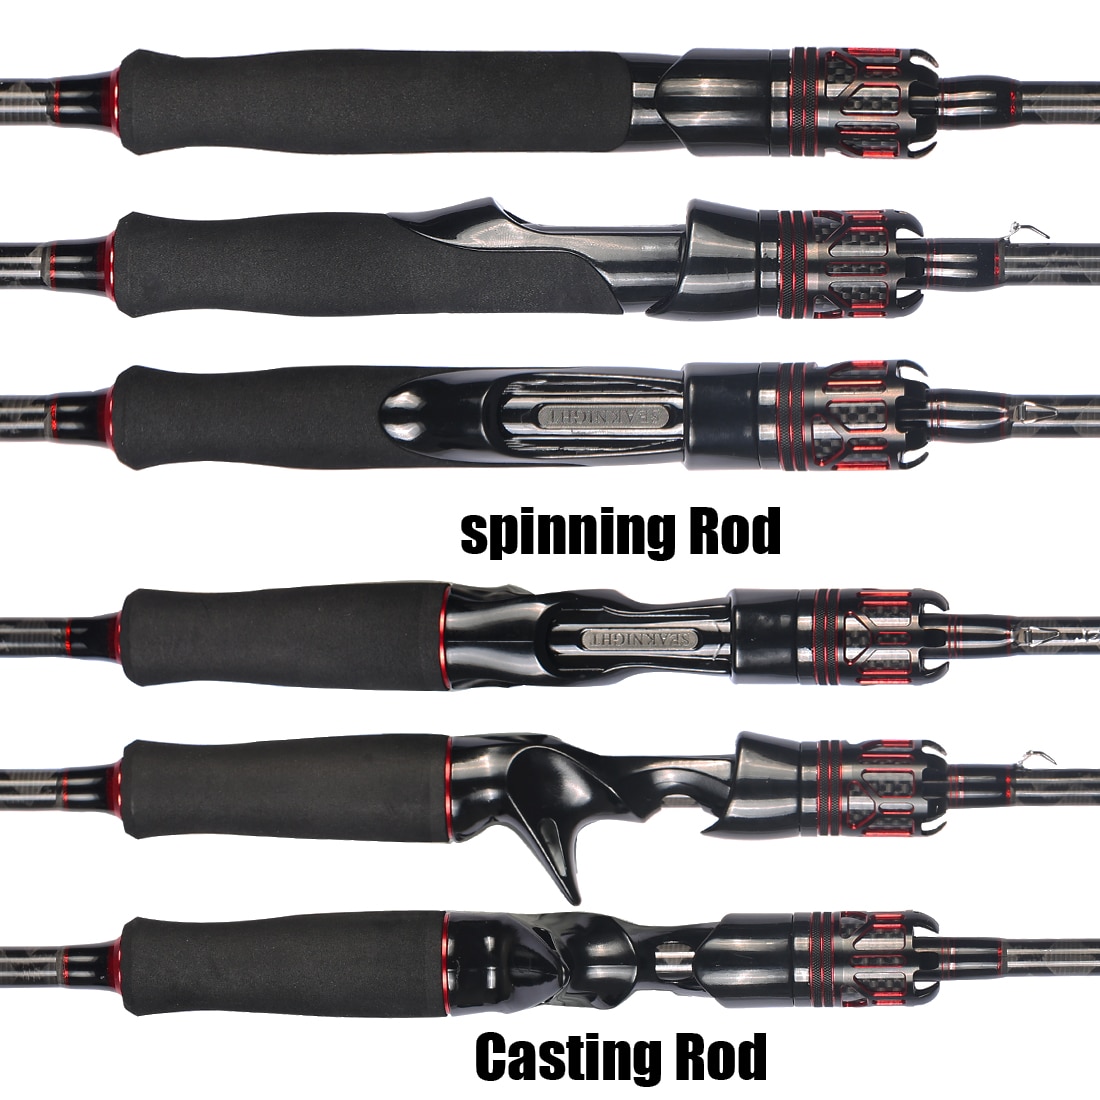 SeaKnight Warg Carbon Fishing Rod 1.8M 1.98M 2.1M 2.4M Ceramic K-Guide  Spinning Casting 2 Sections Lure Rod 1.5-45g